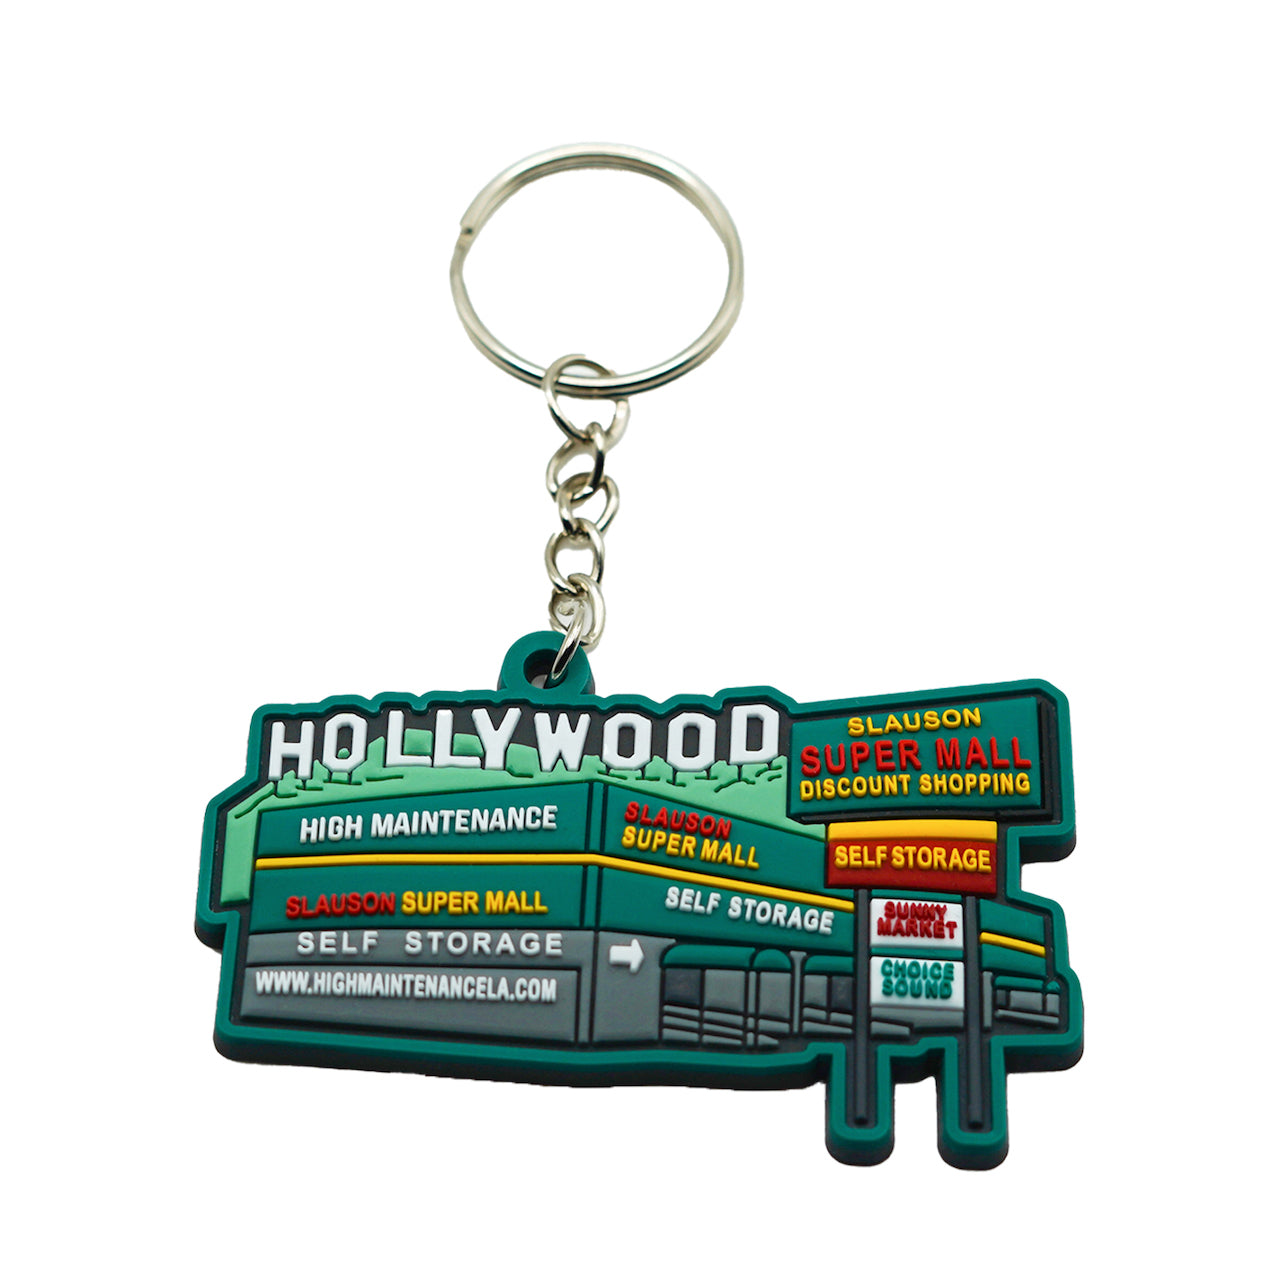 The Culture Keychain